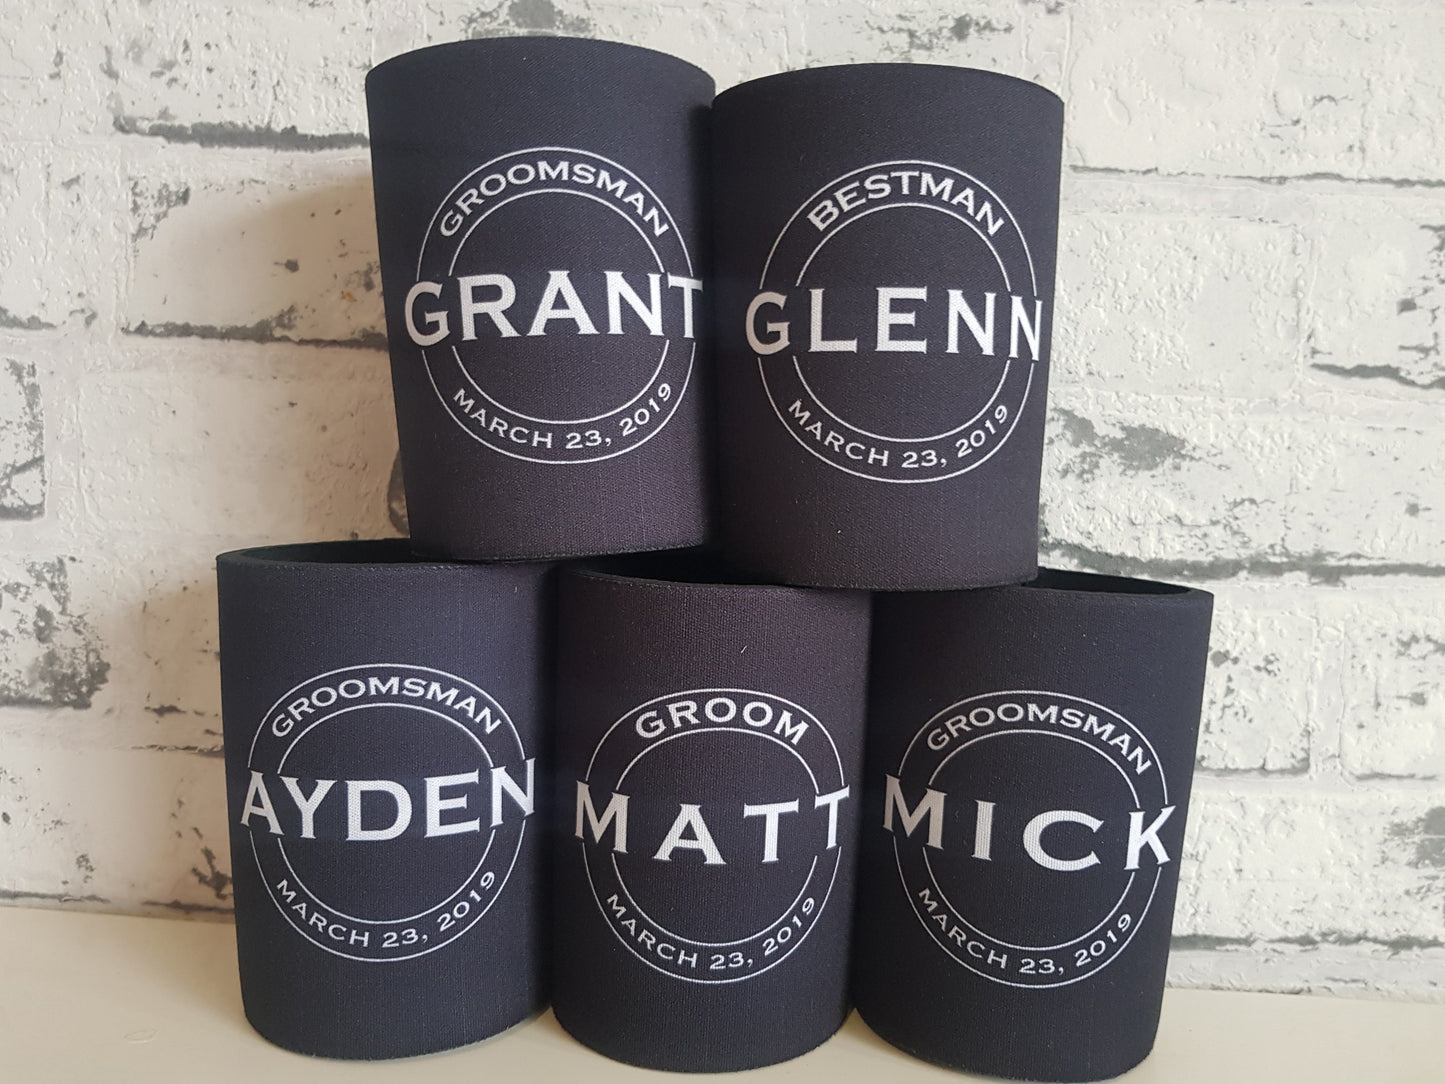 SALE - Stubby Holder with base for Bridal Party - Groom, Groomsman, Best Man,